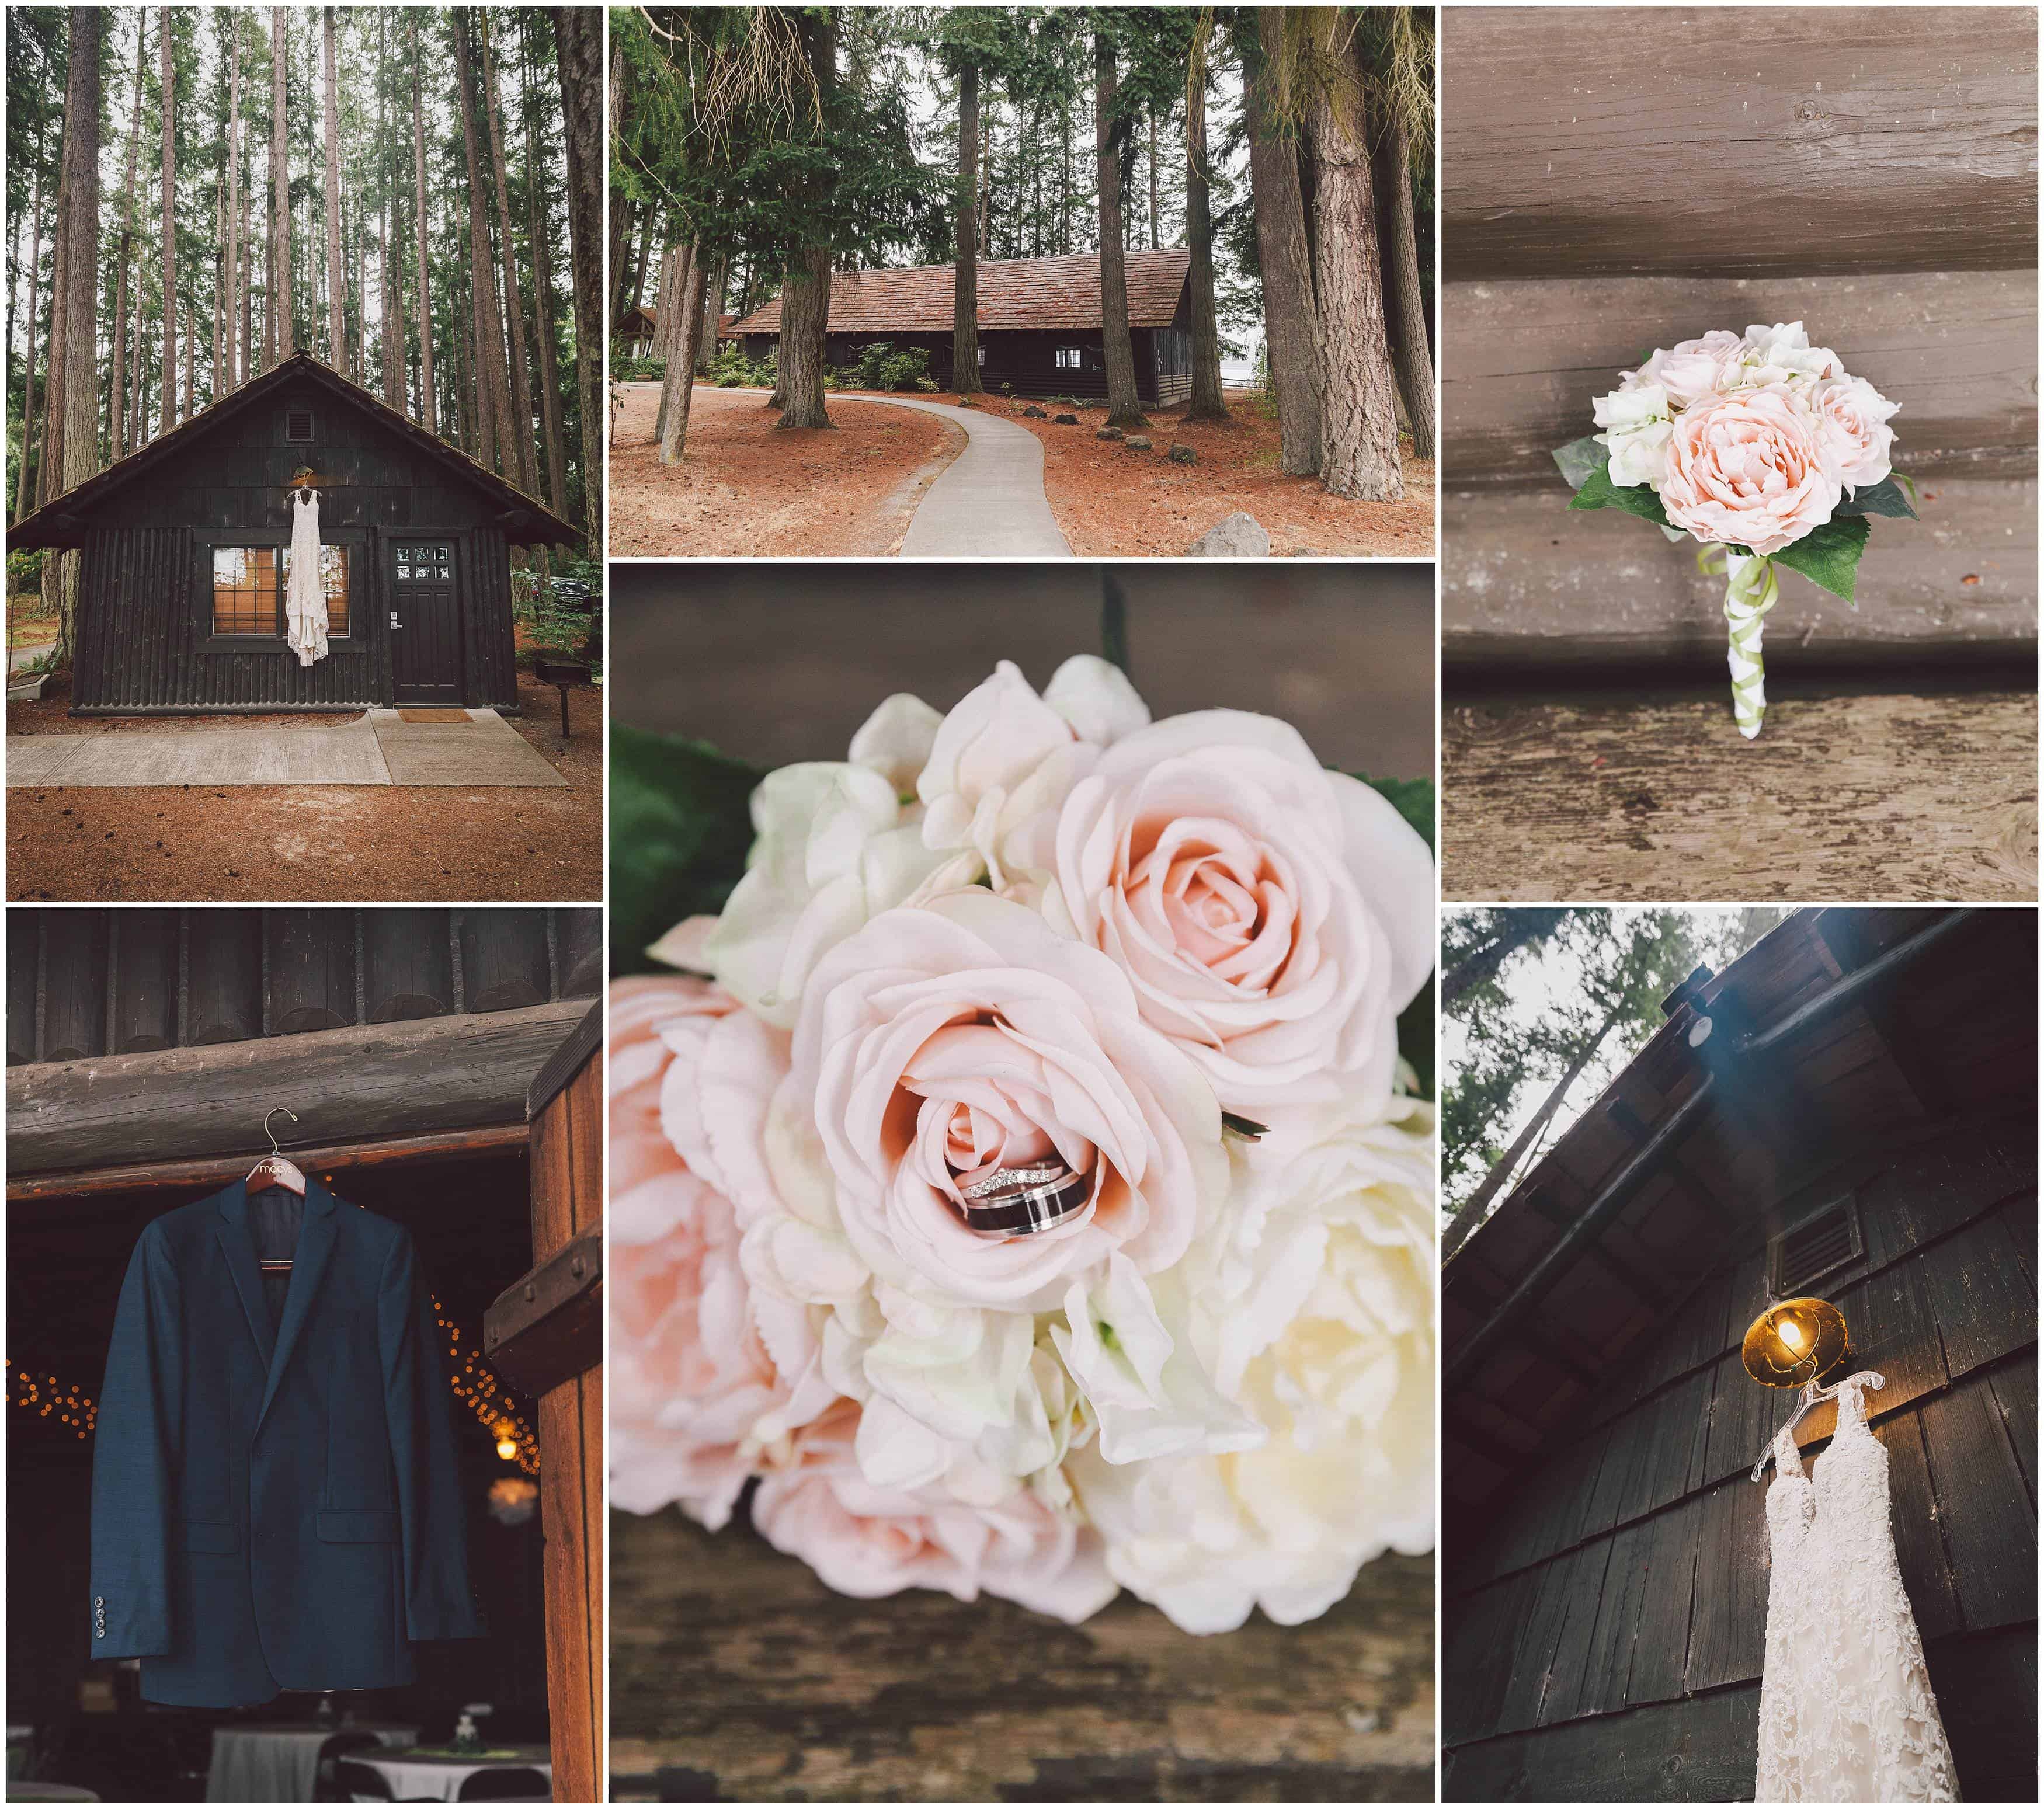 Details for this Poulsbo wedding